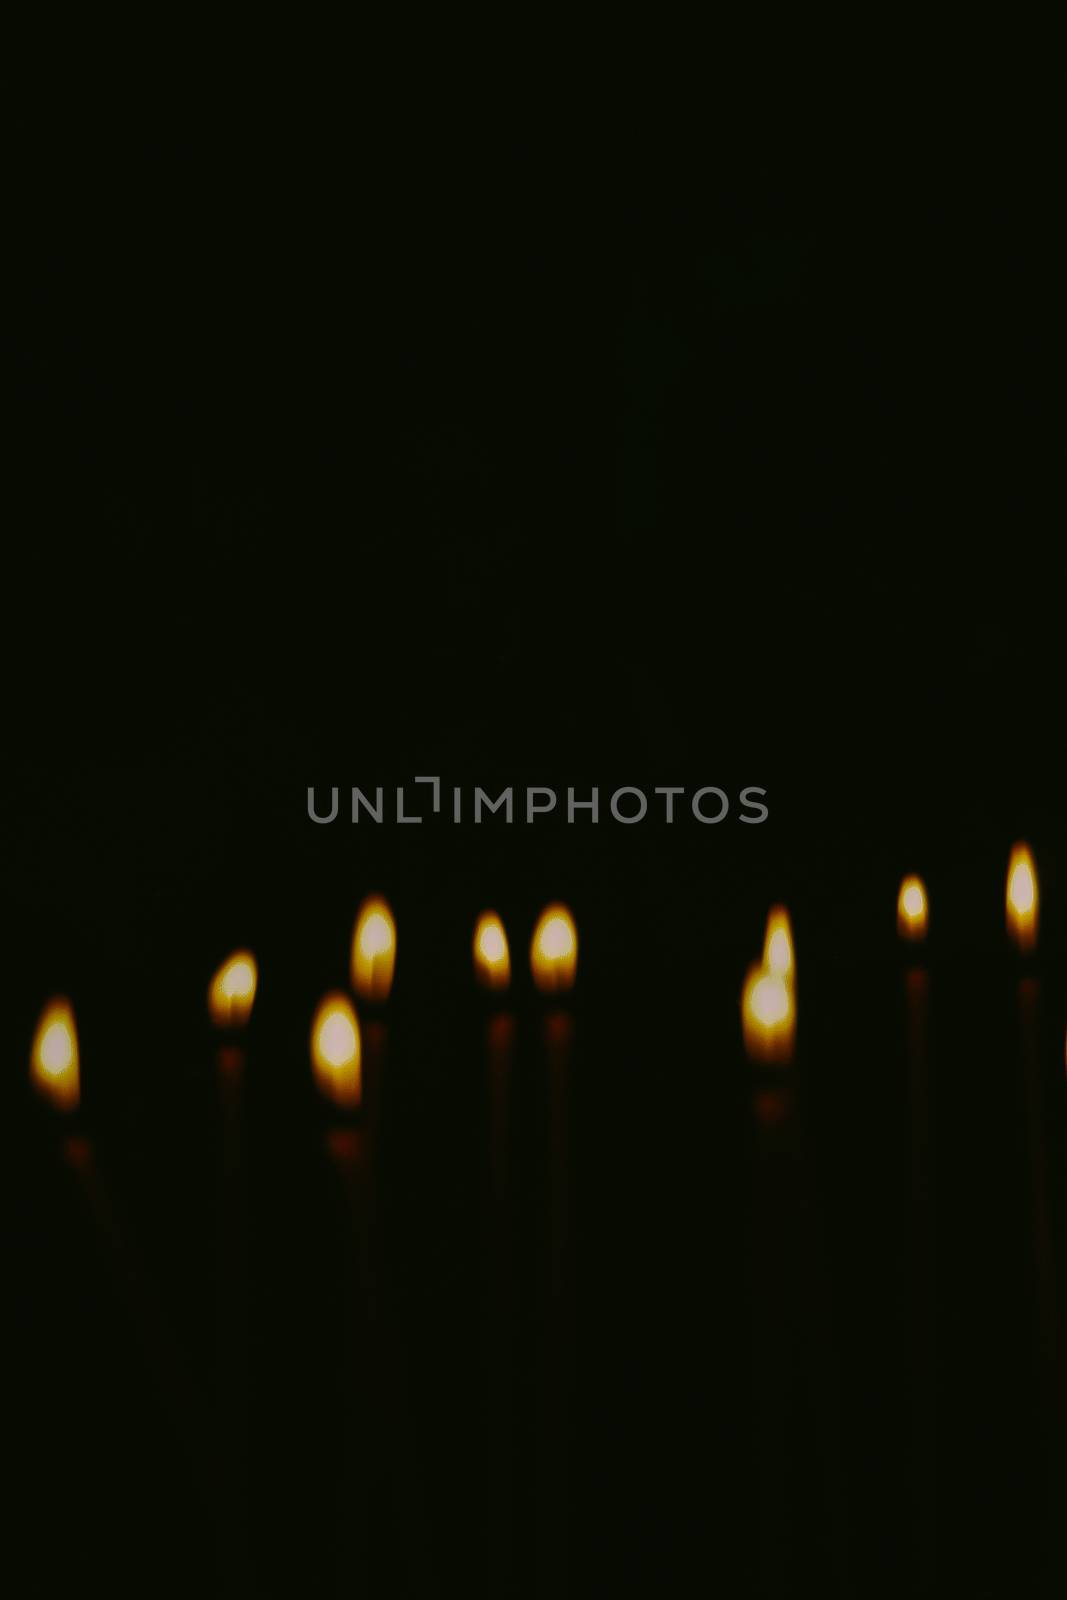 Artistic abstract blur background with church candles